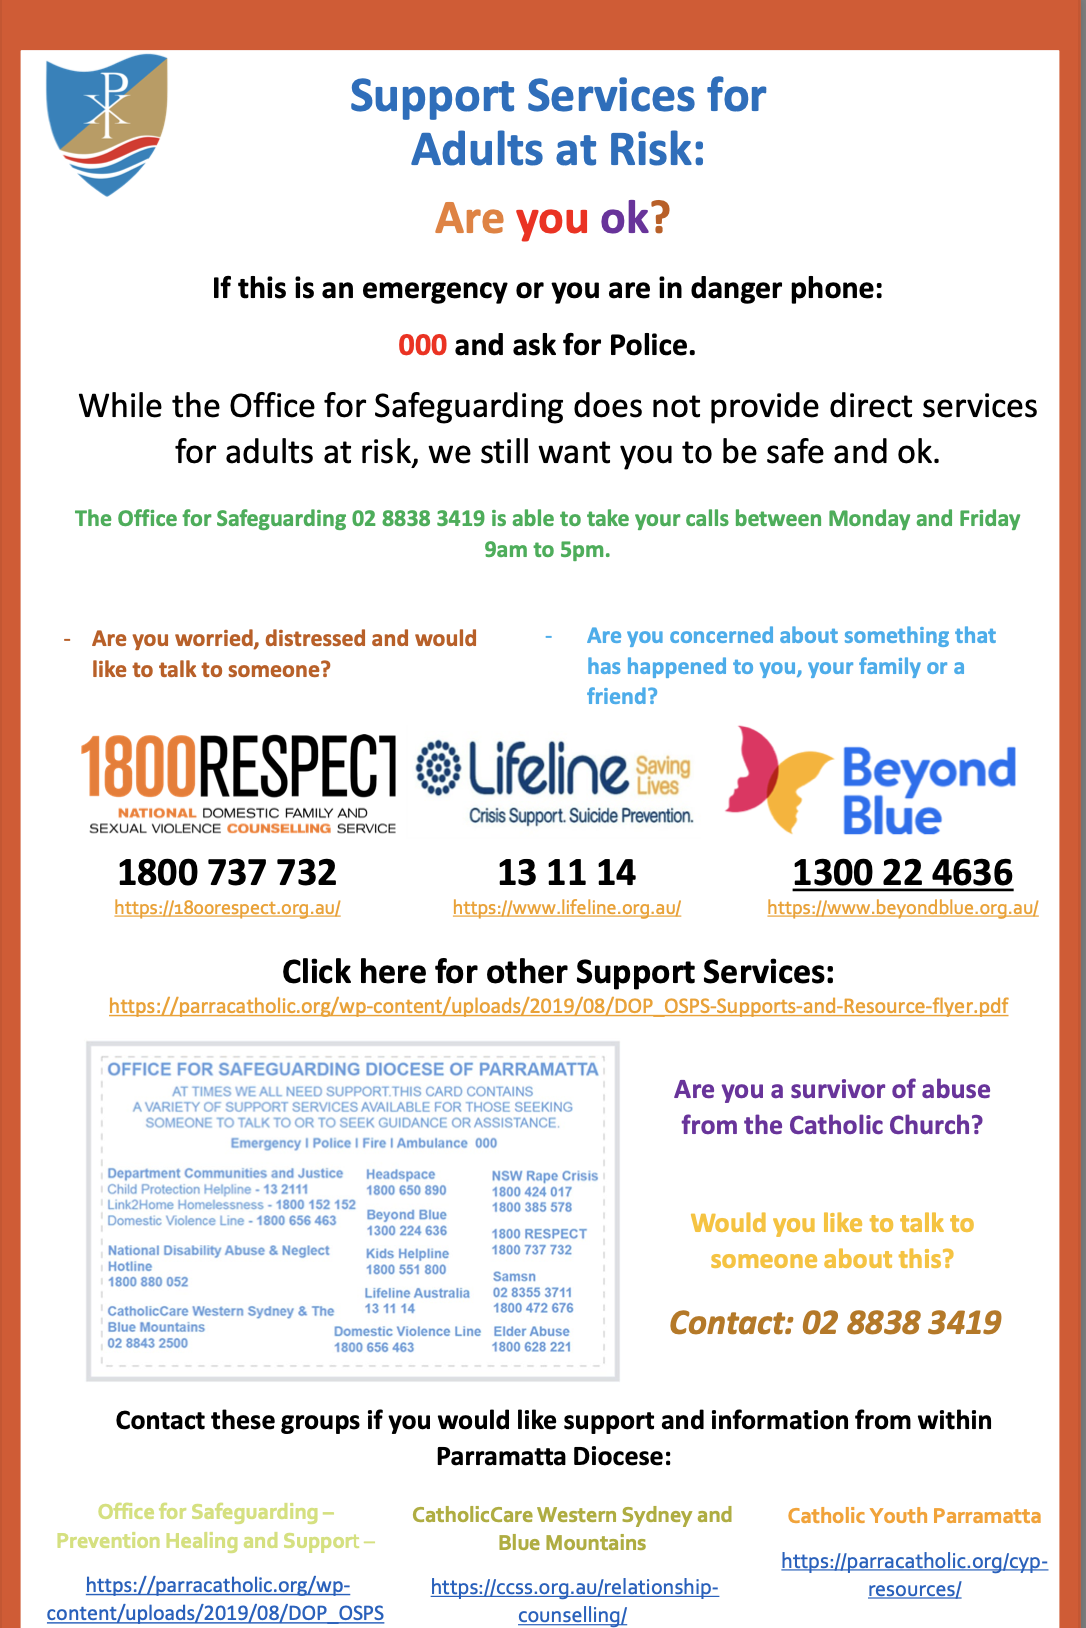 Support Services for Adults at Risk